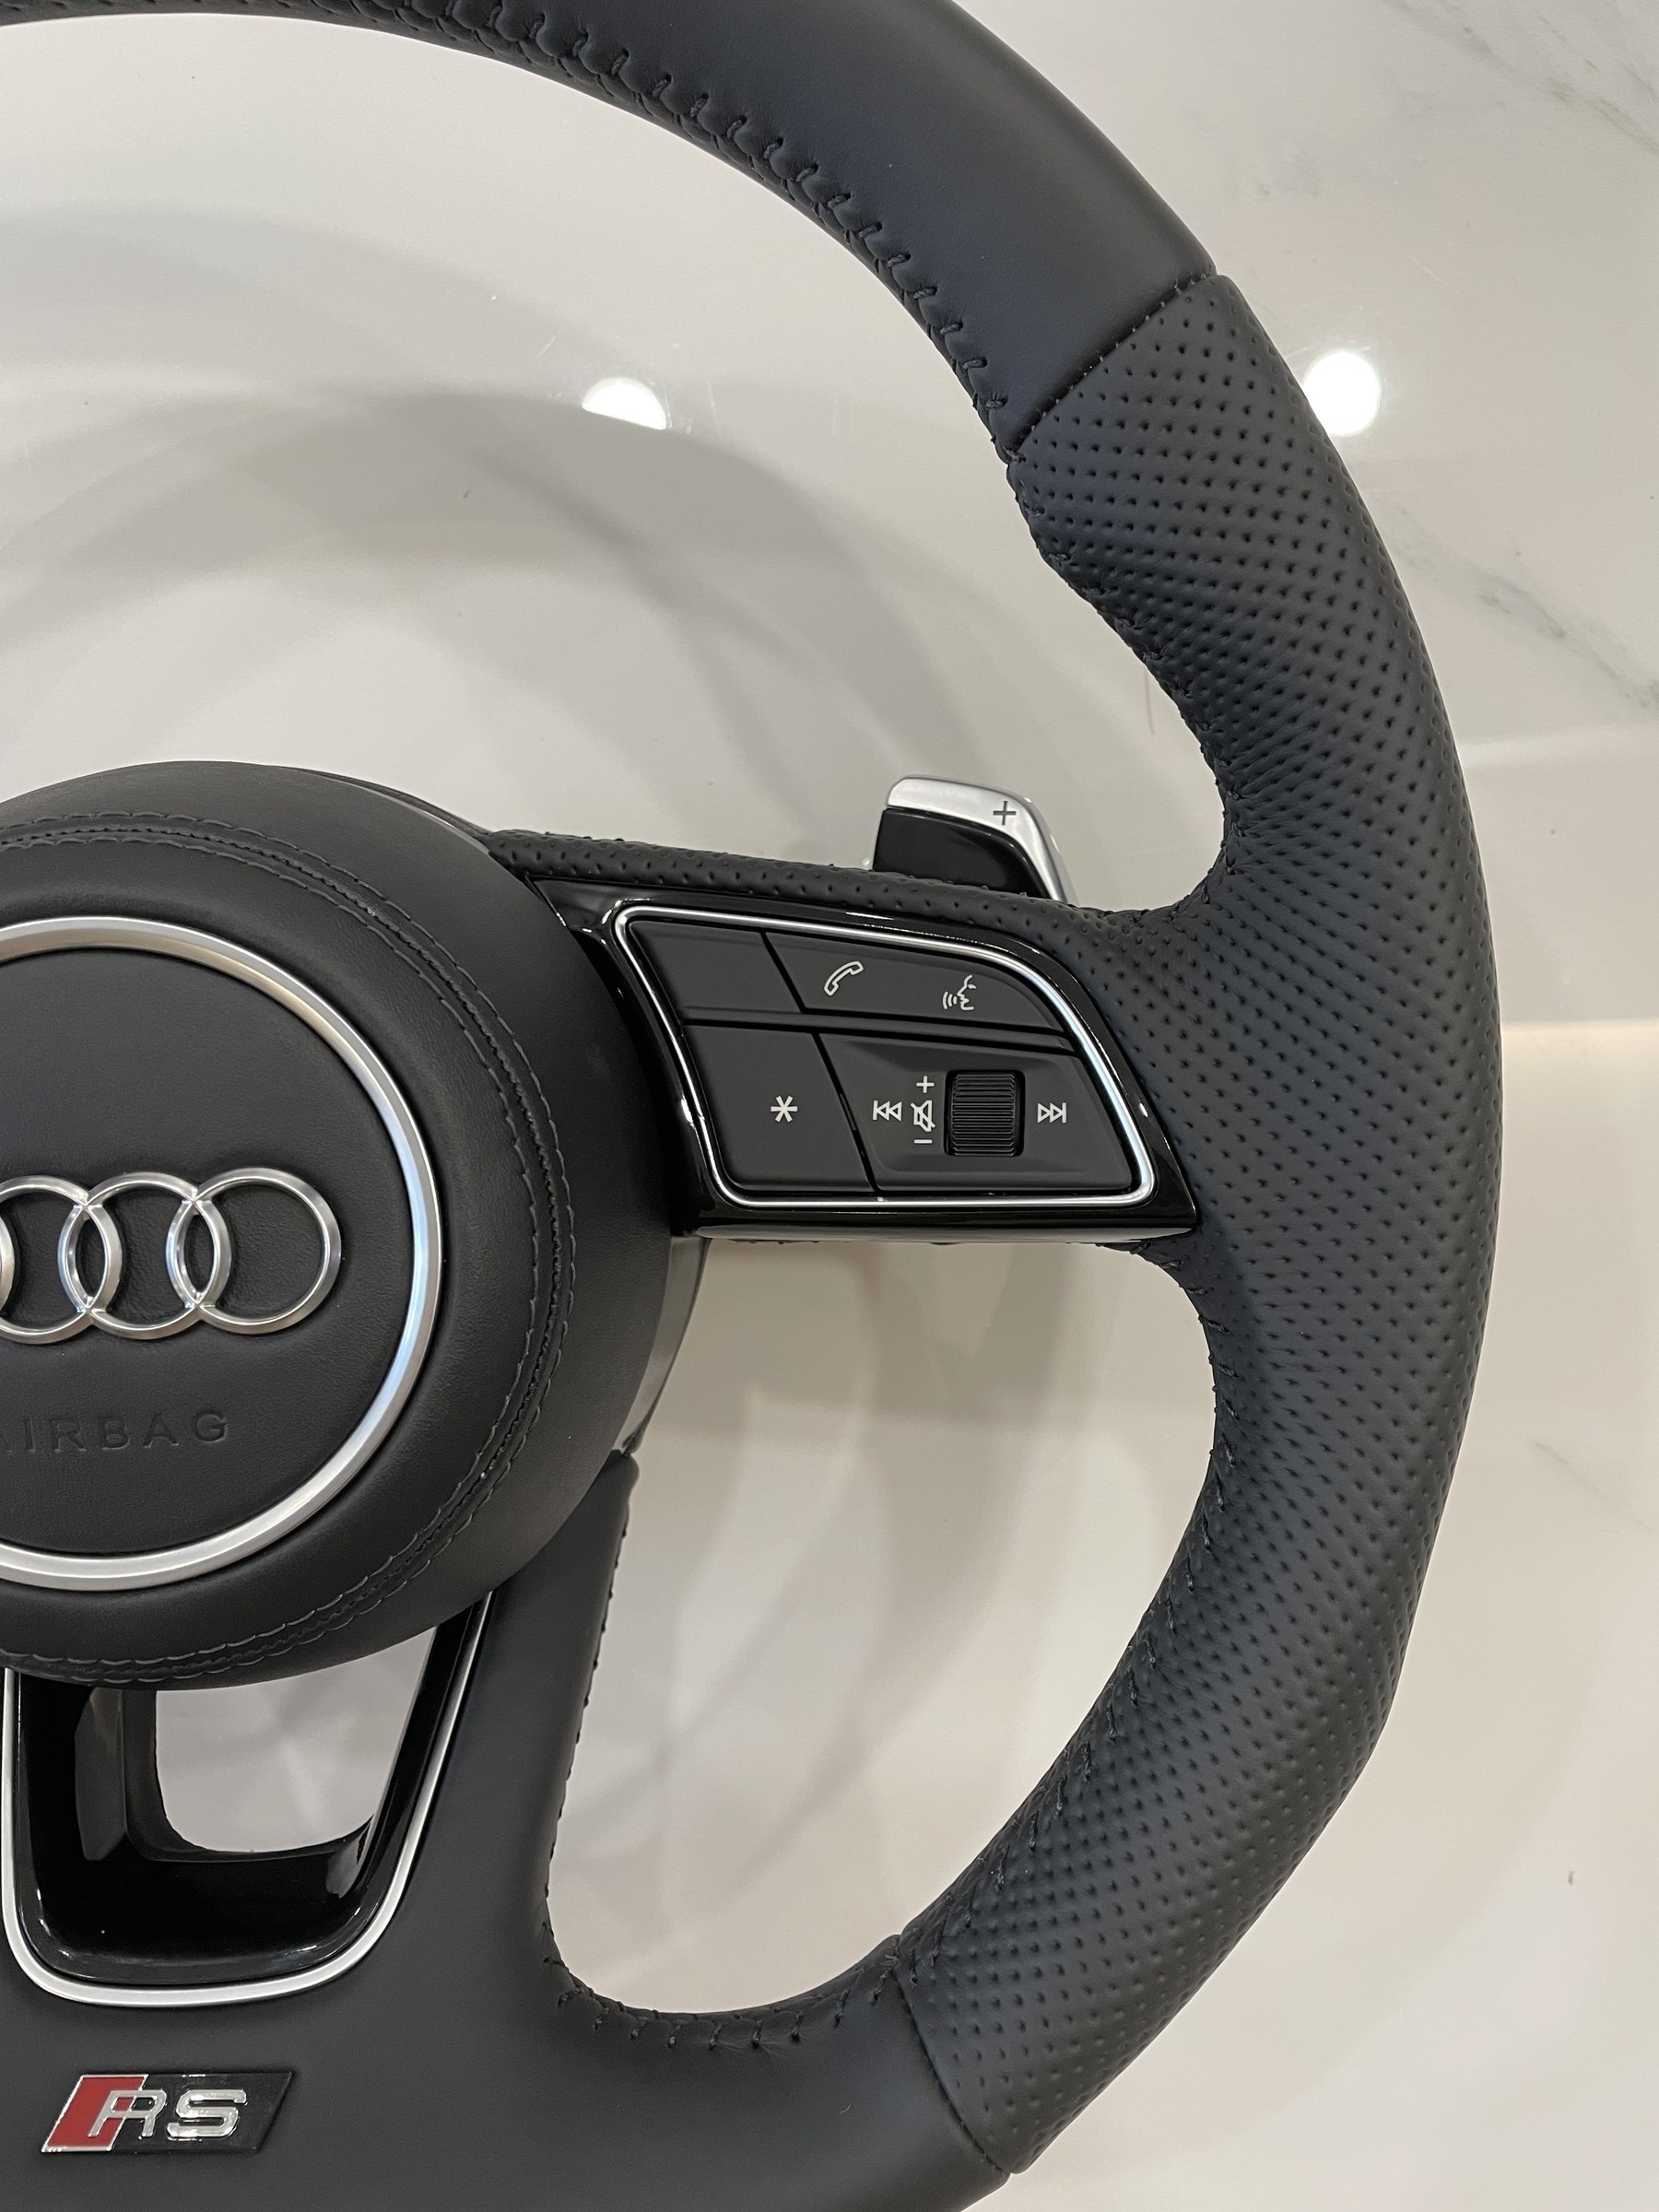 Audi RS Style Steering wheel with Decoder for A4/A5 B8 – Modhub Steering  Wheels